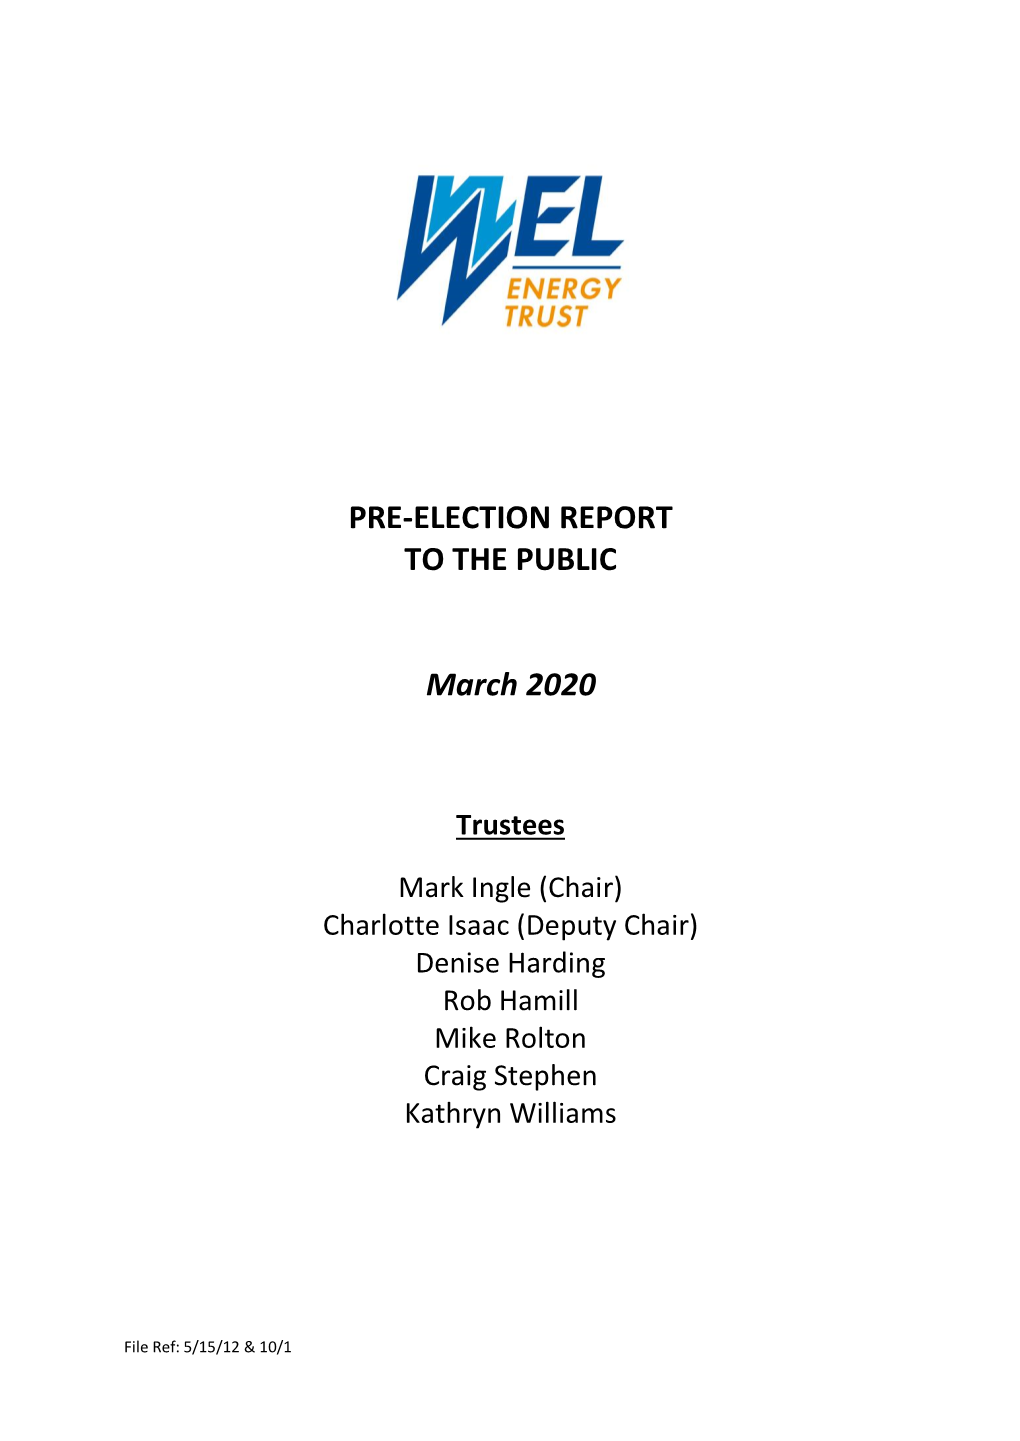 PRE-ELECTION REPORT to the PUBLIC March 2020